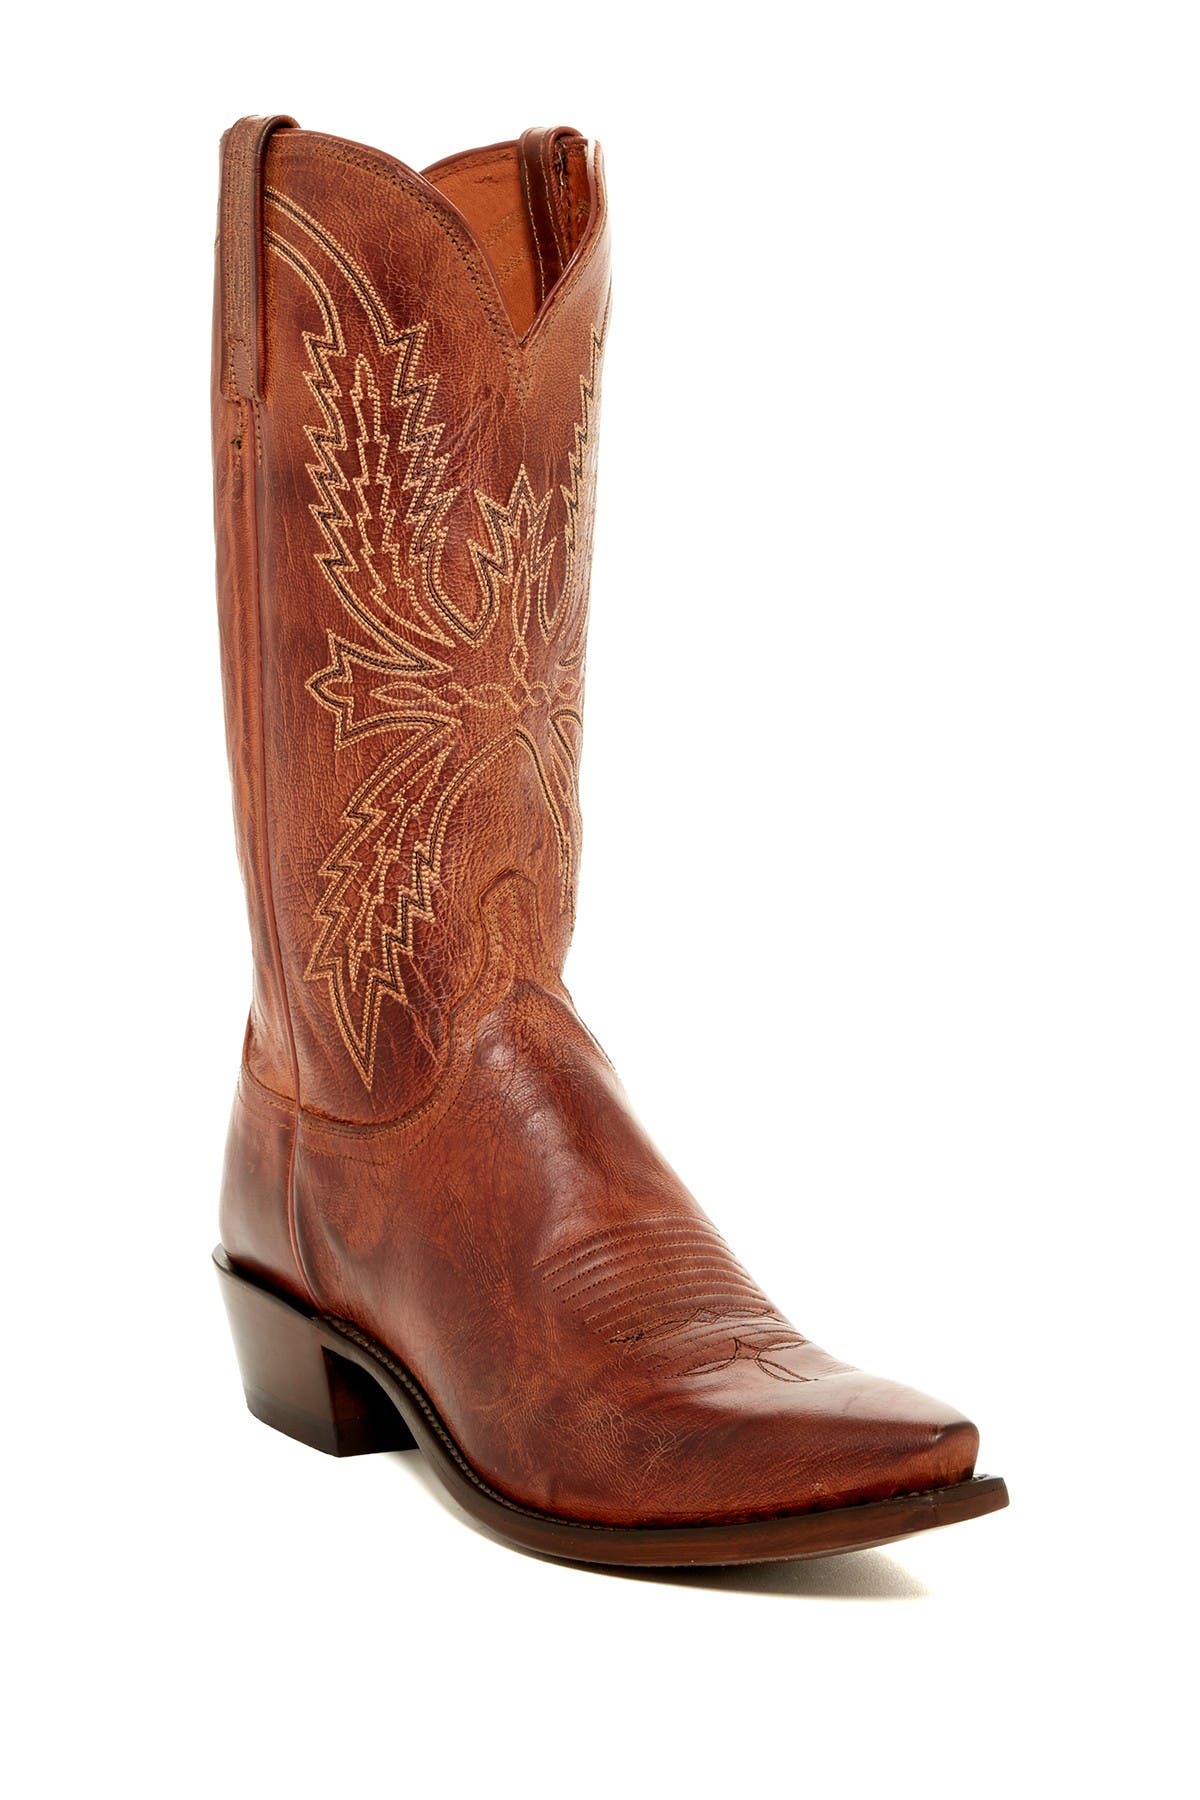 Lucchese | Mad Dog Goat Leather Boot 